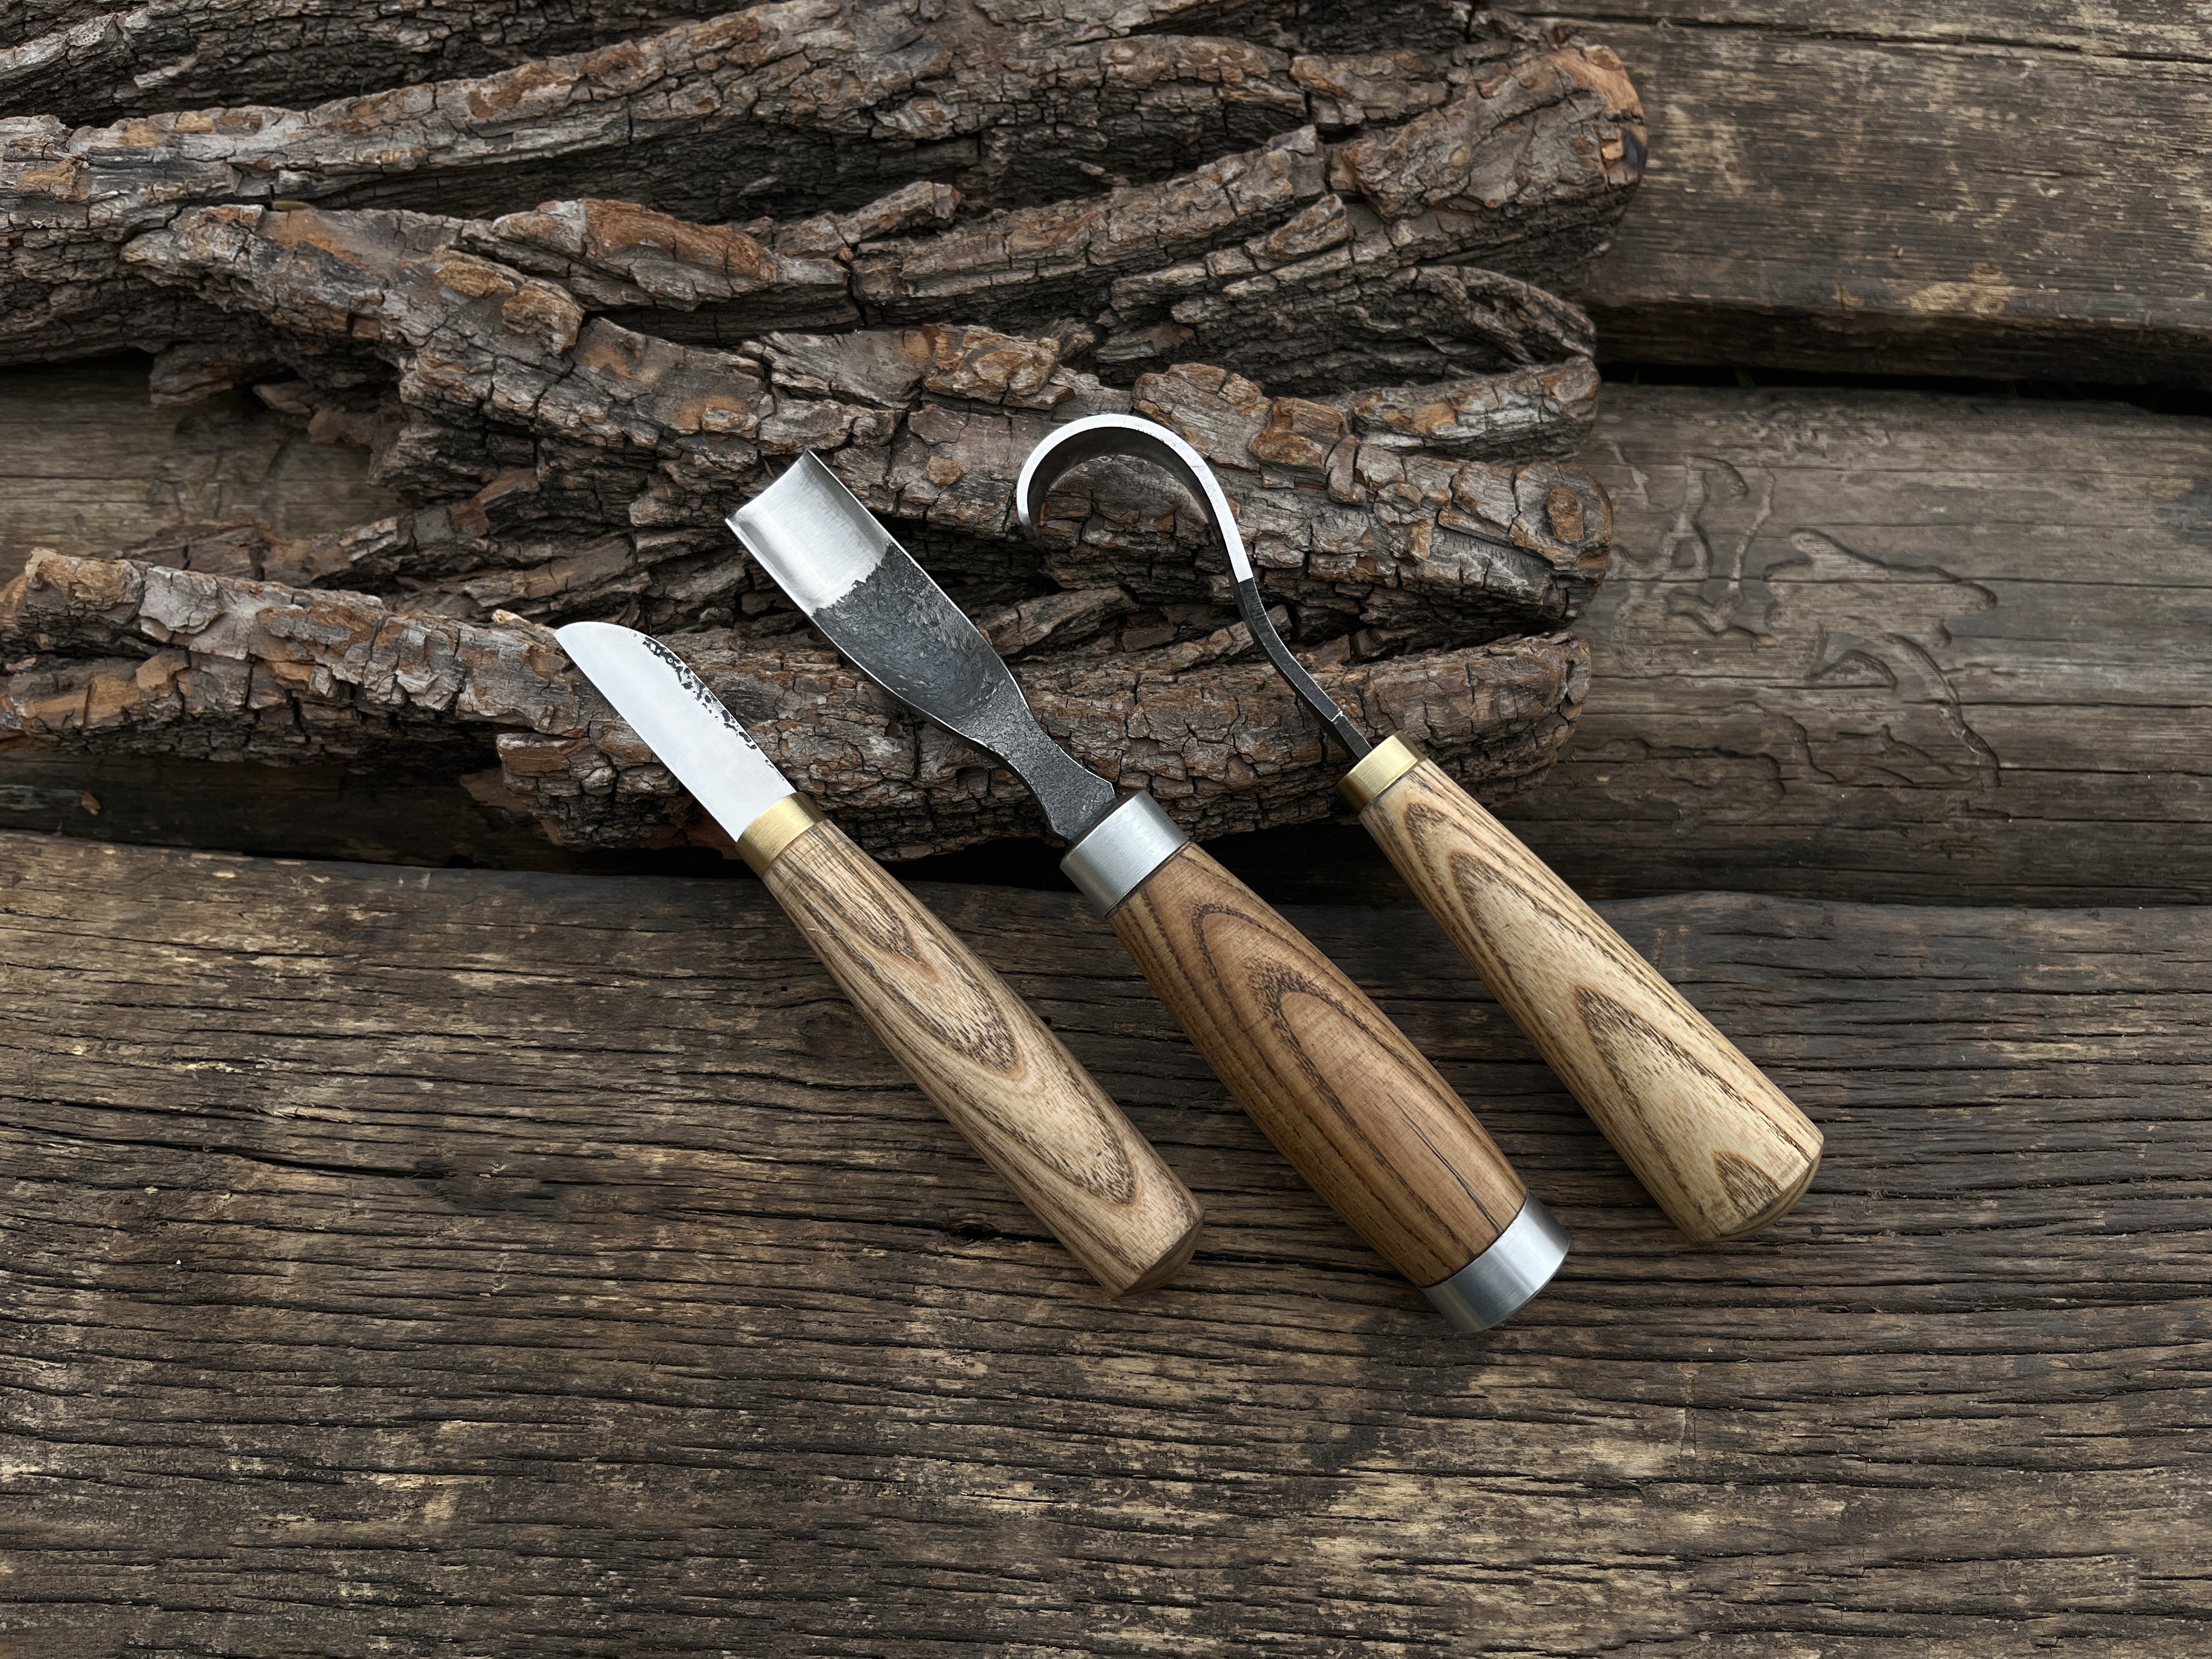 3-Piece Hand-Forged Spoon Carving Tool Set